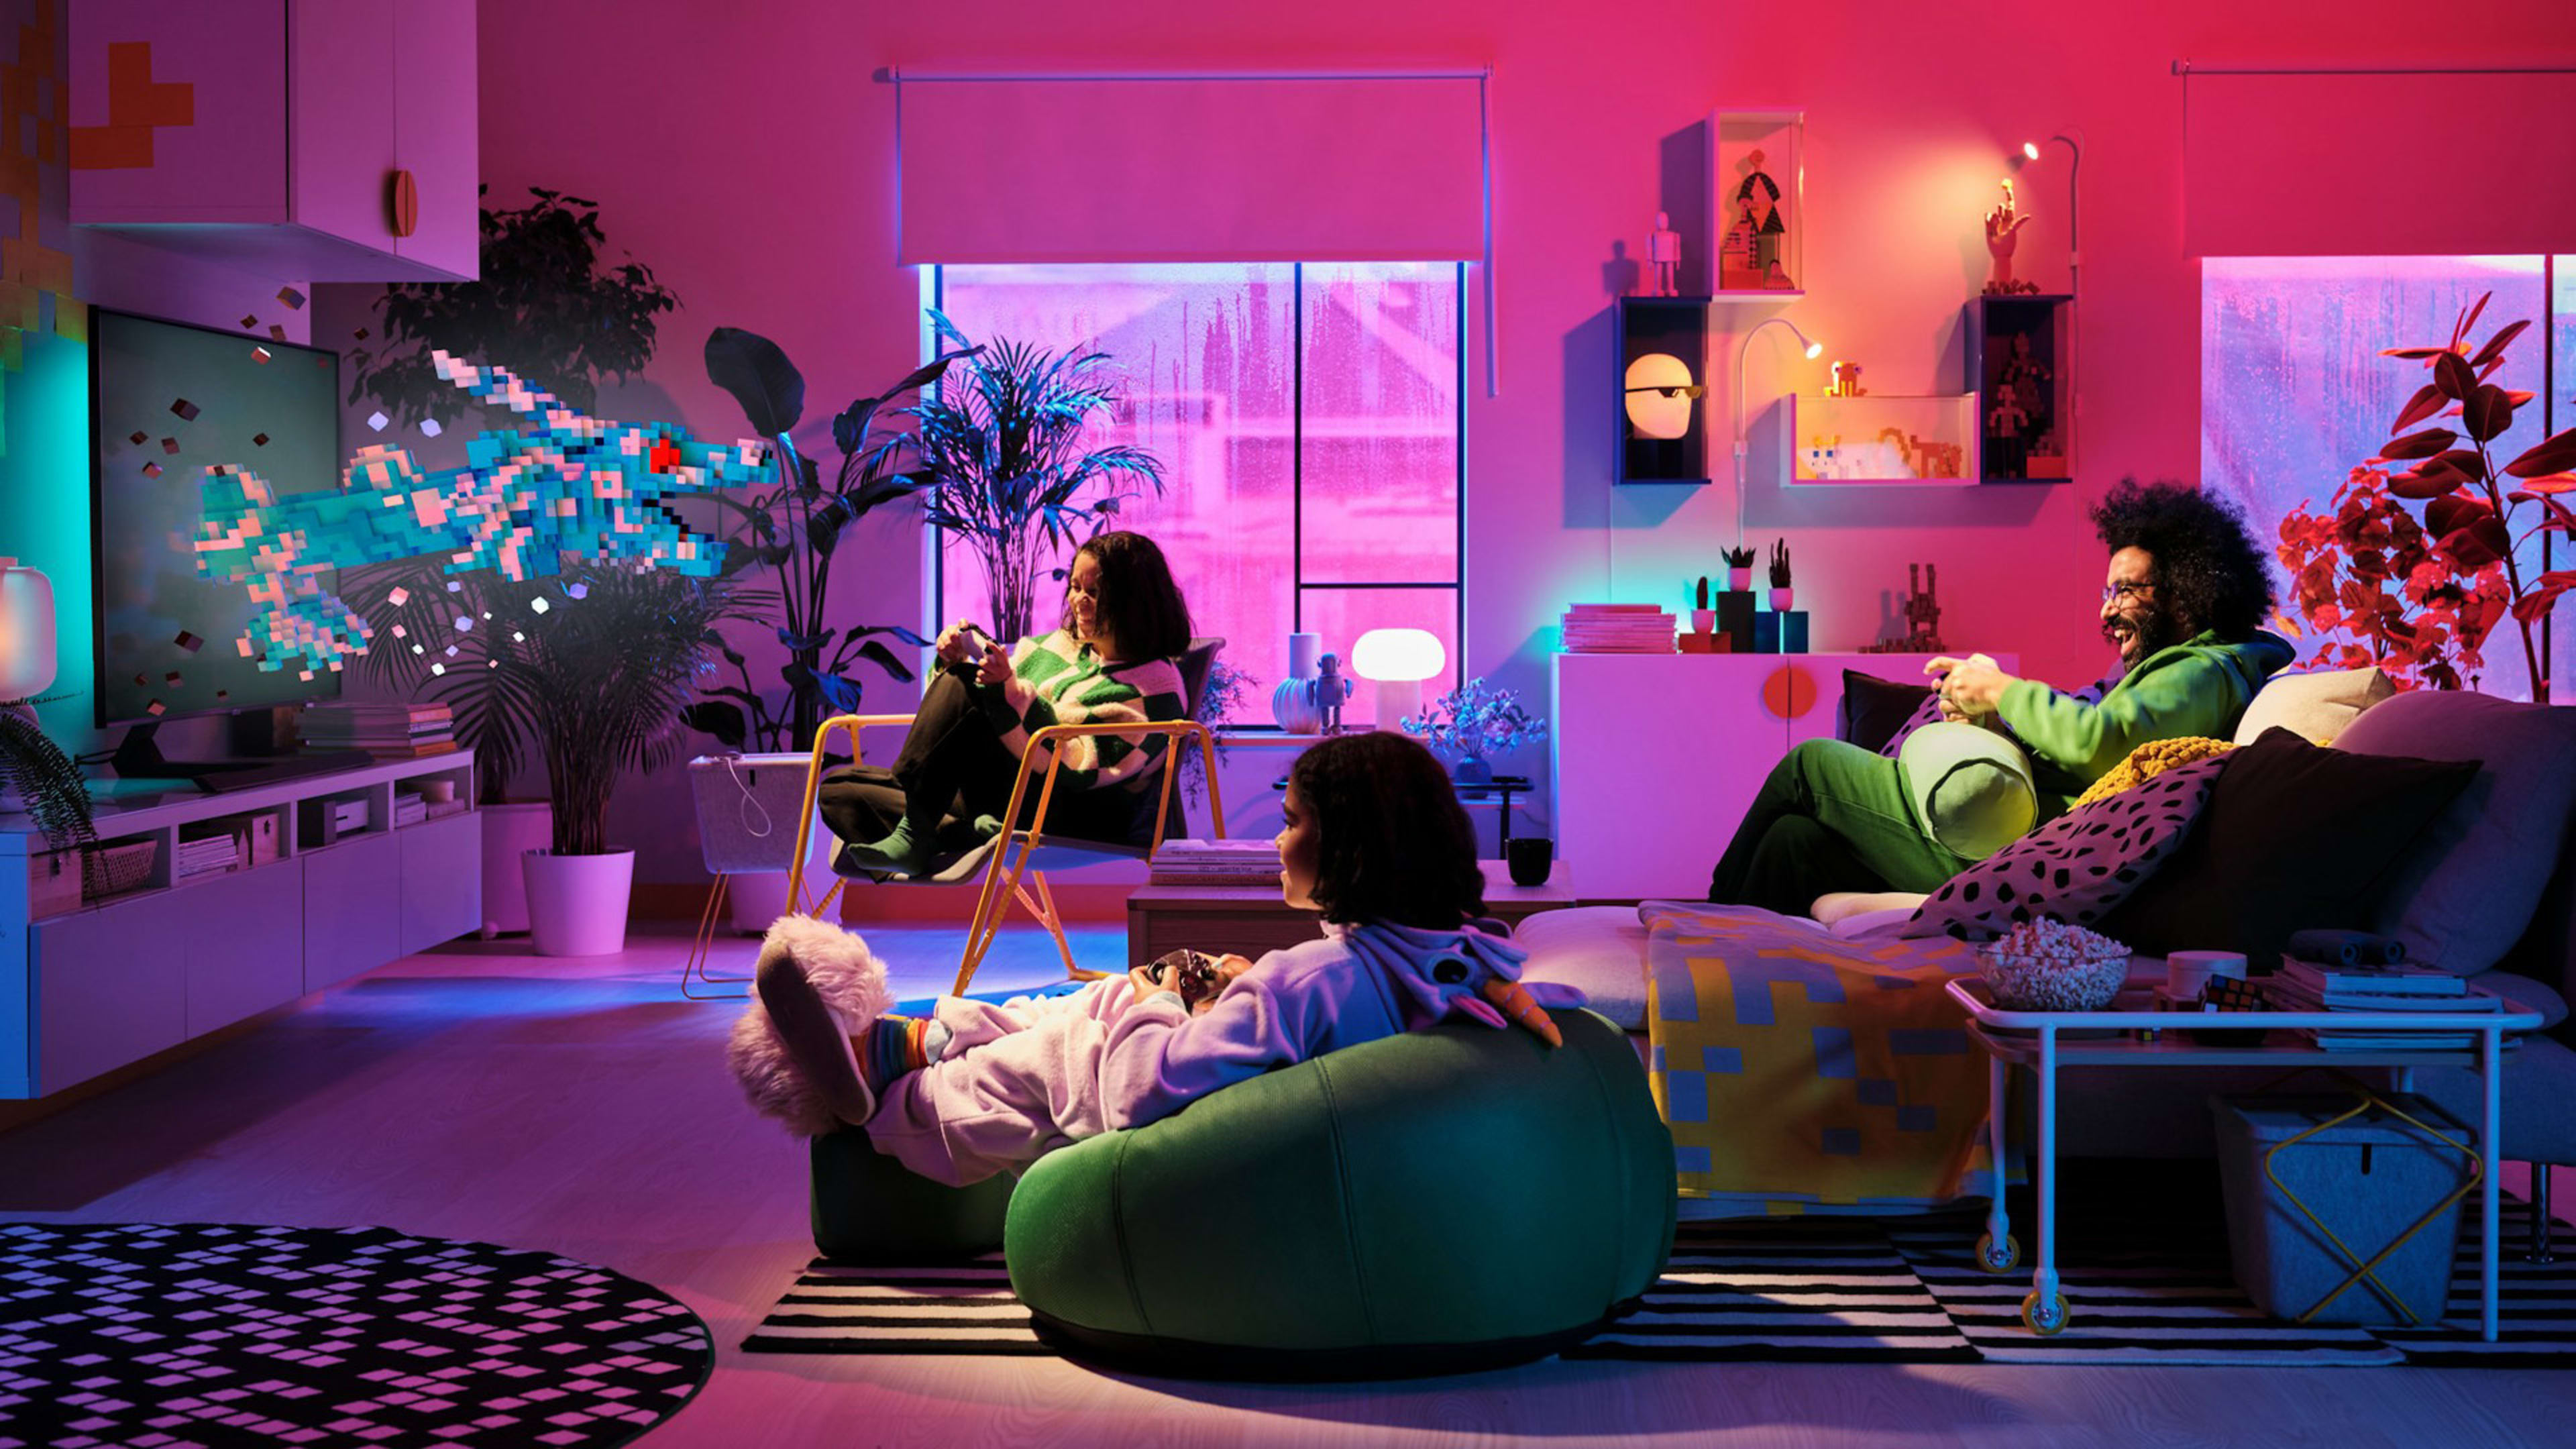 Ikea’s new gaming furniture is bright, flexible, and inflatable